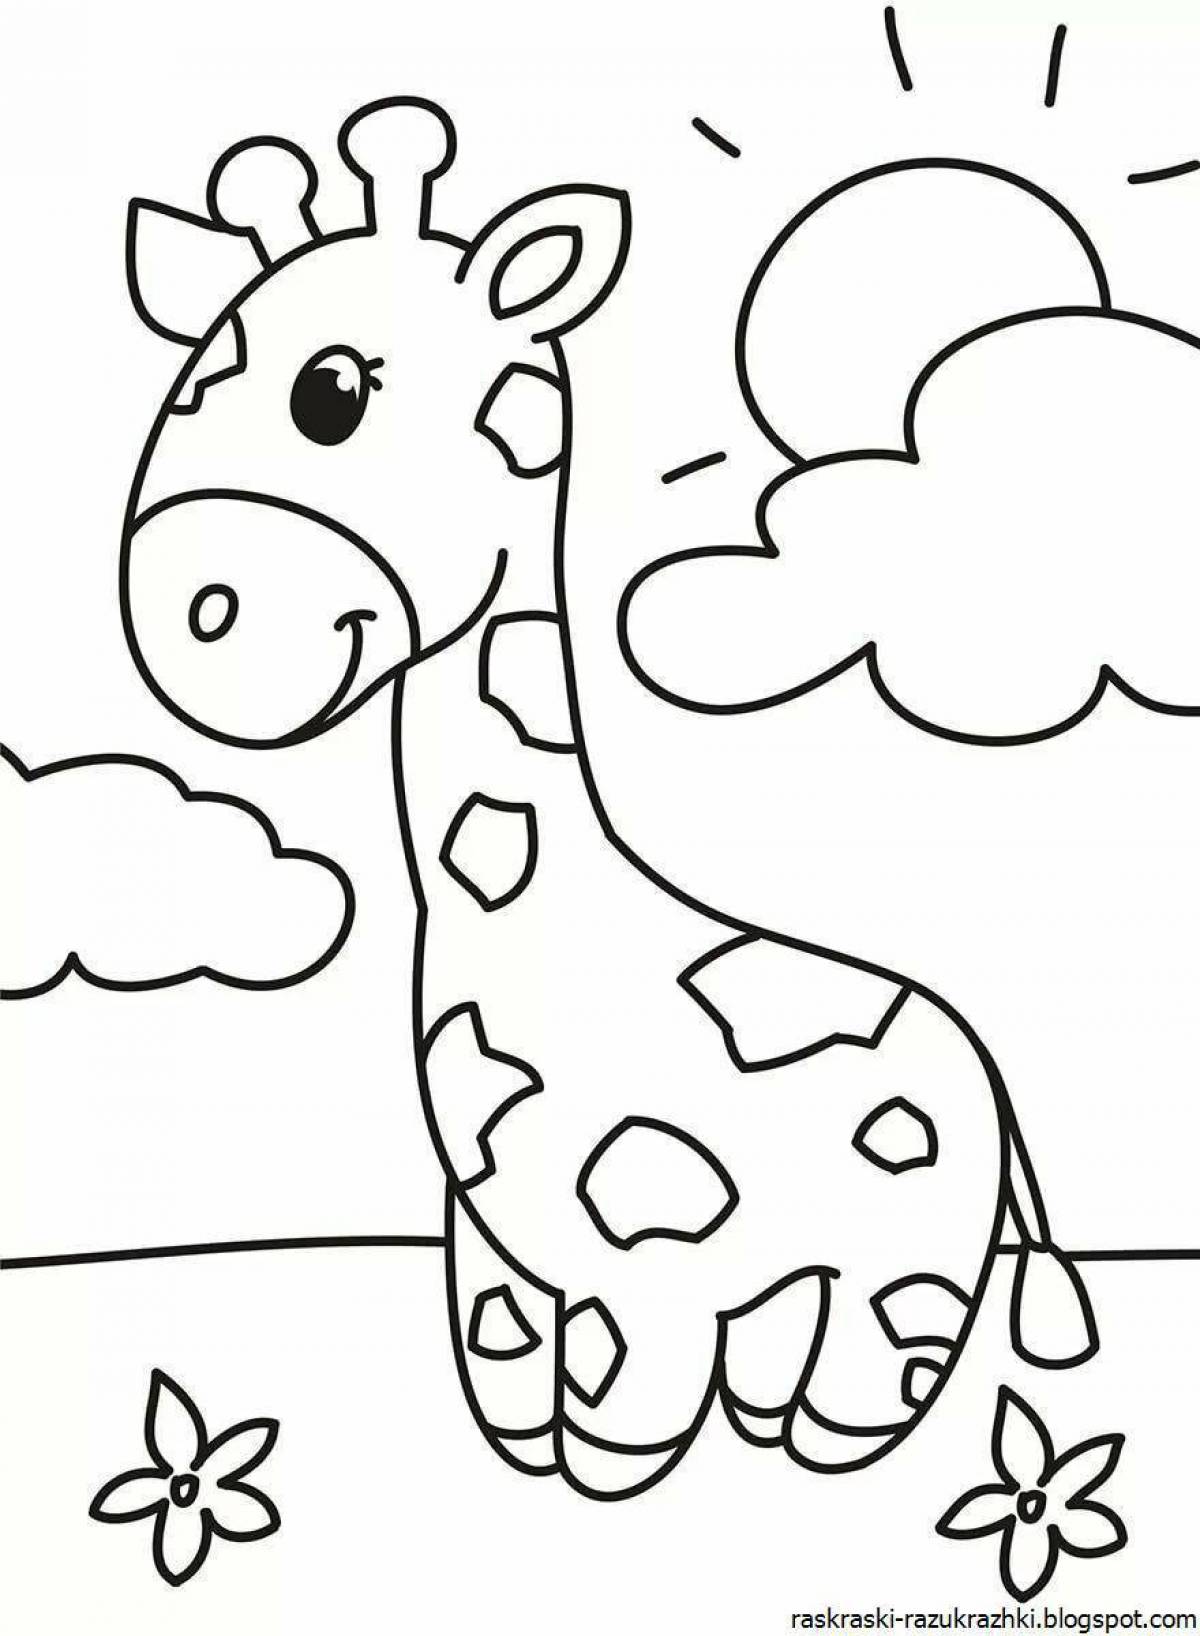 Explosion coloring book for 3-5 year olds